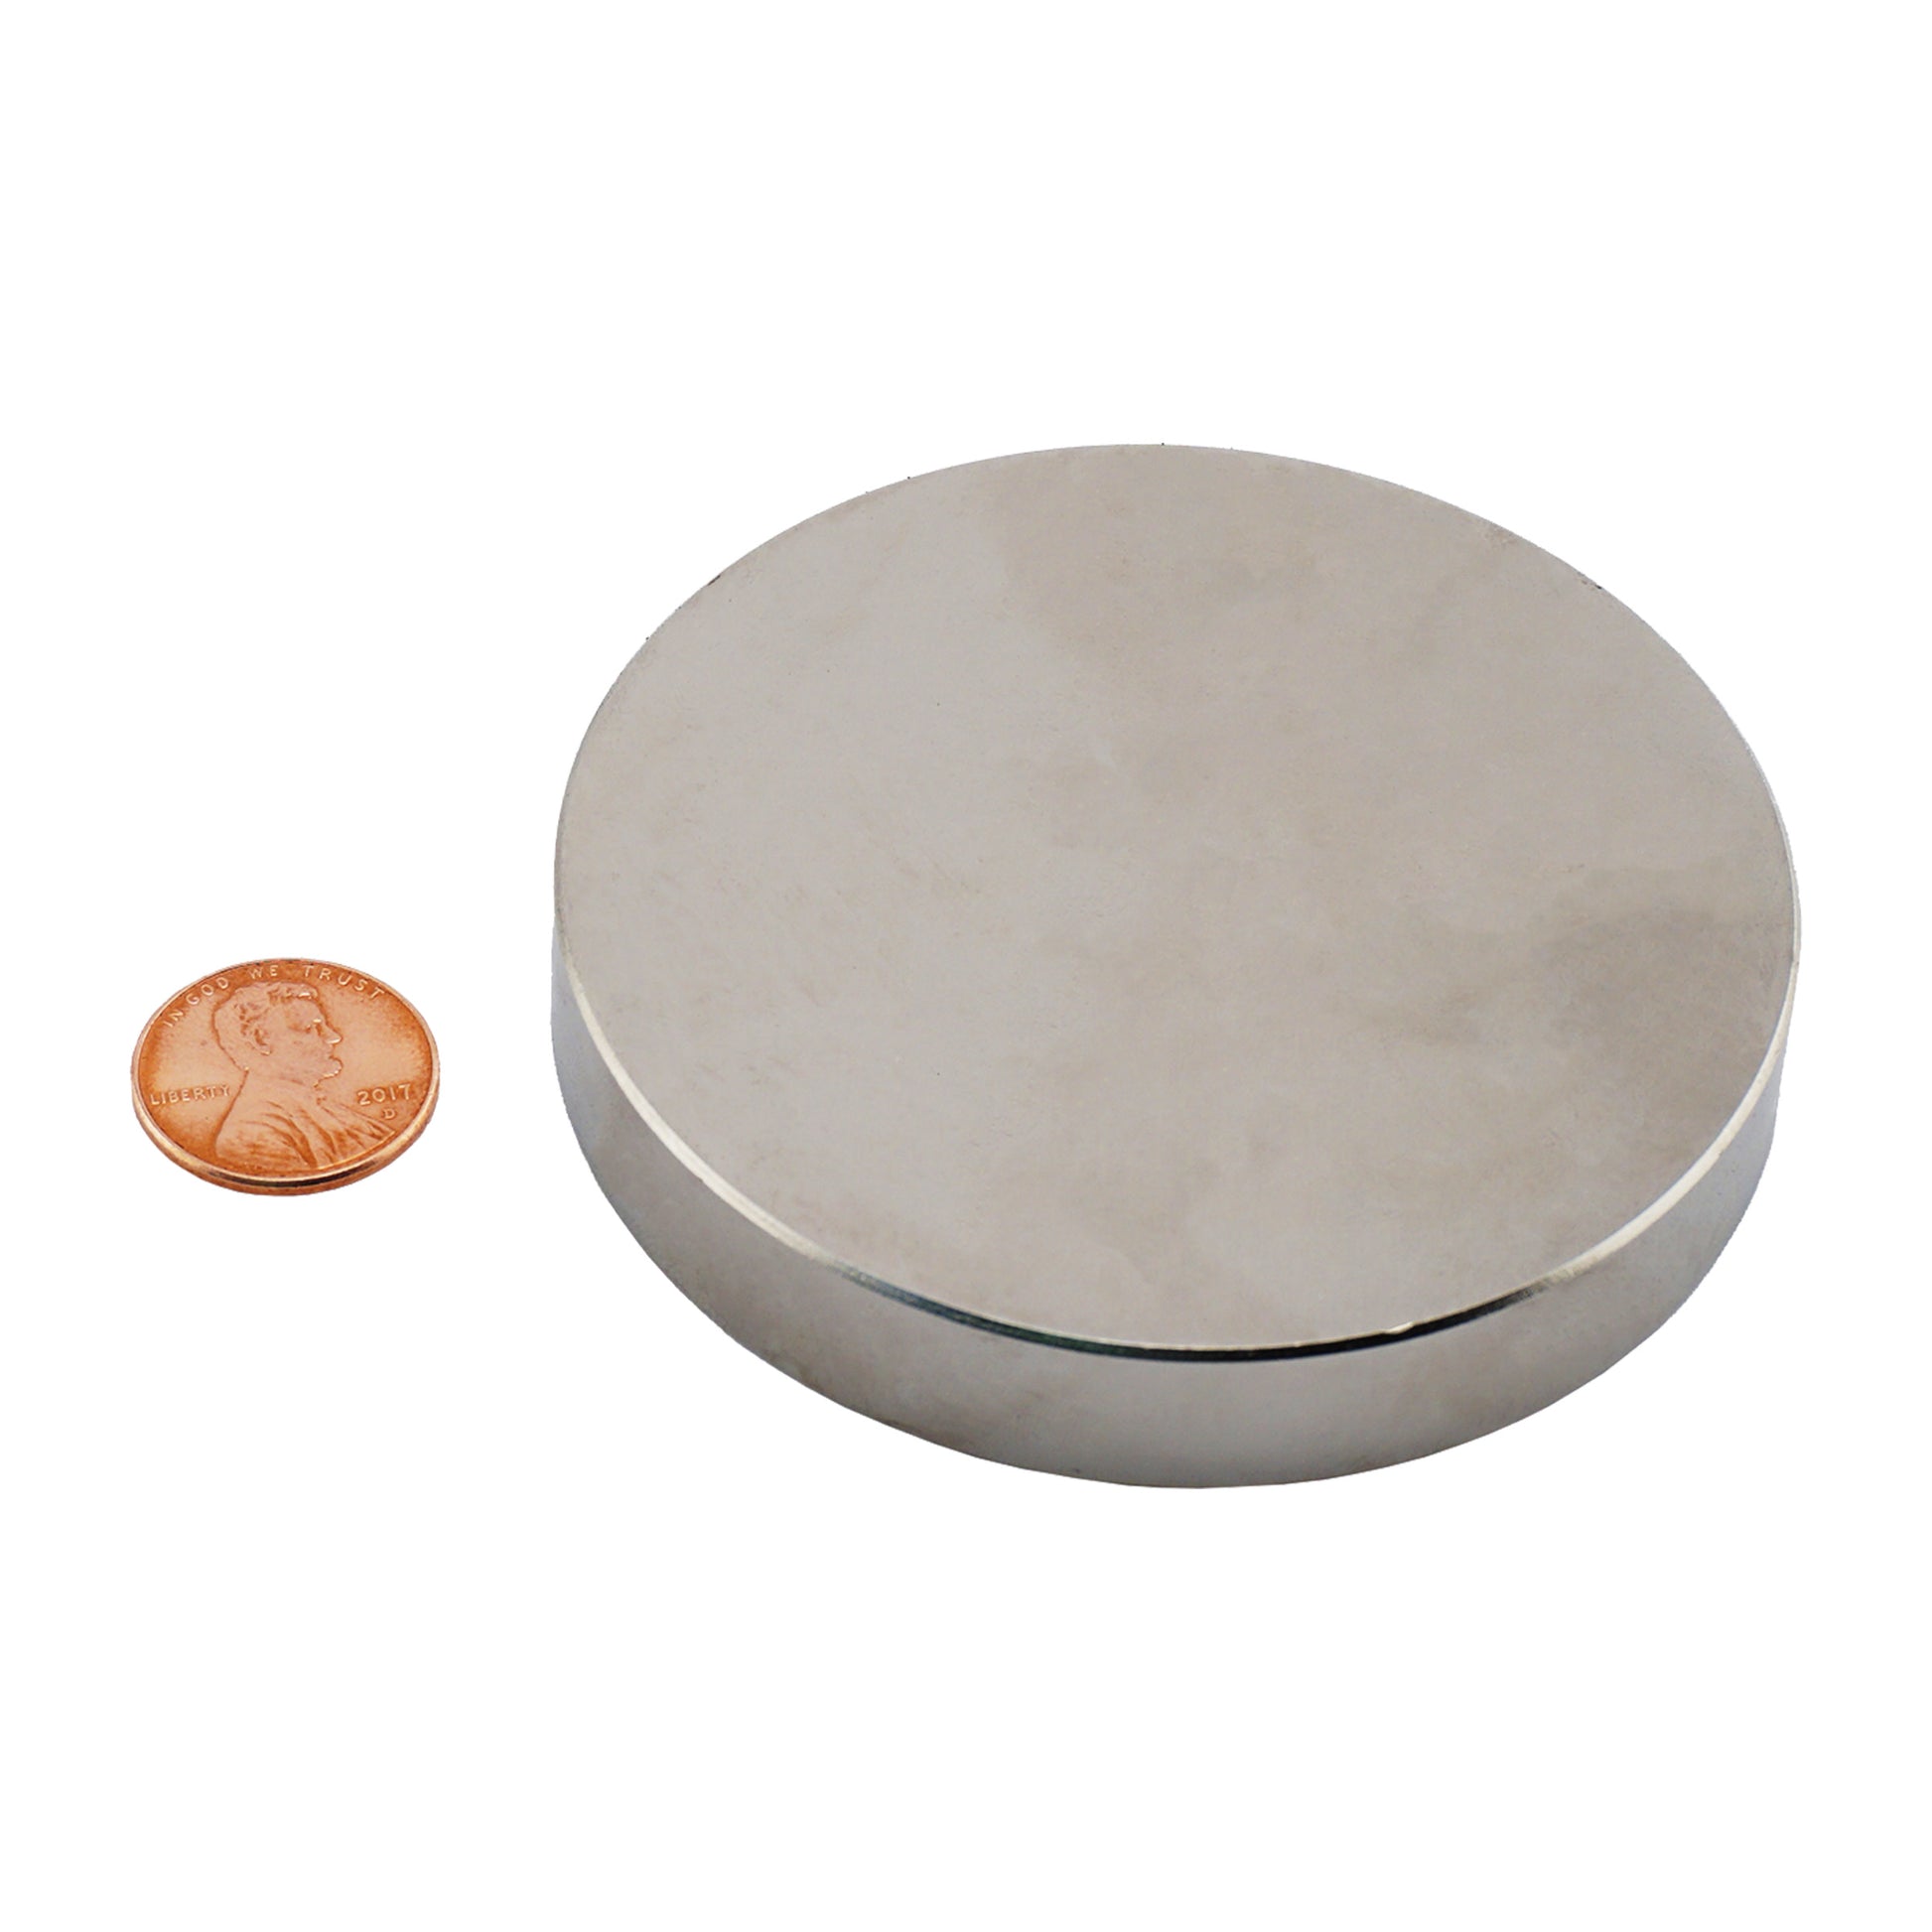 Load image into Gallery viewer, ND030003N Neodymium Disc Magnet - Compared to Penny for Size Reference